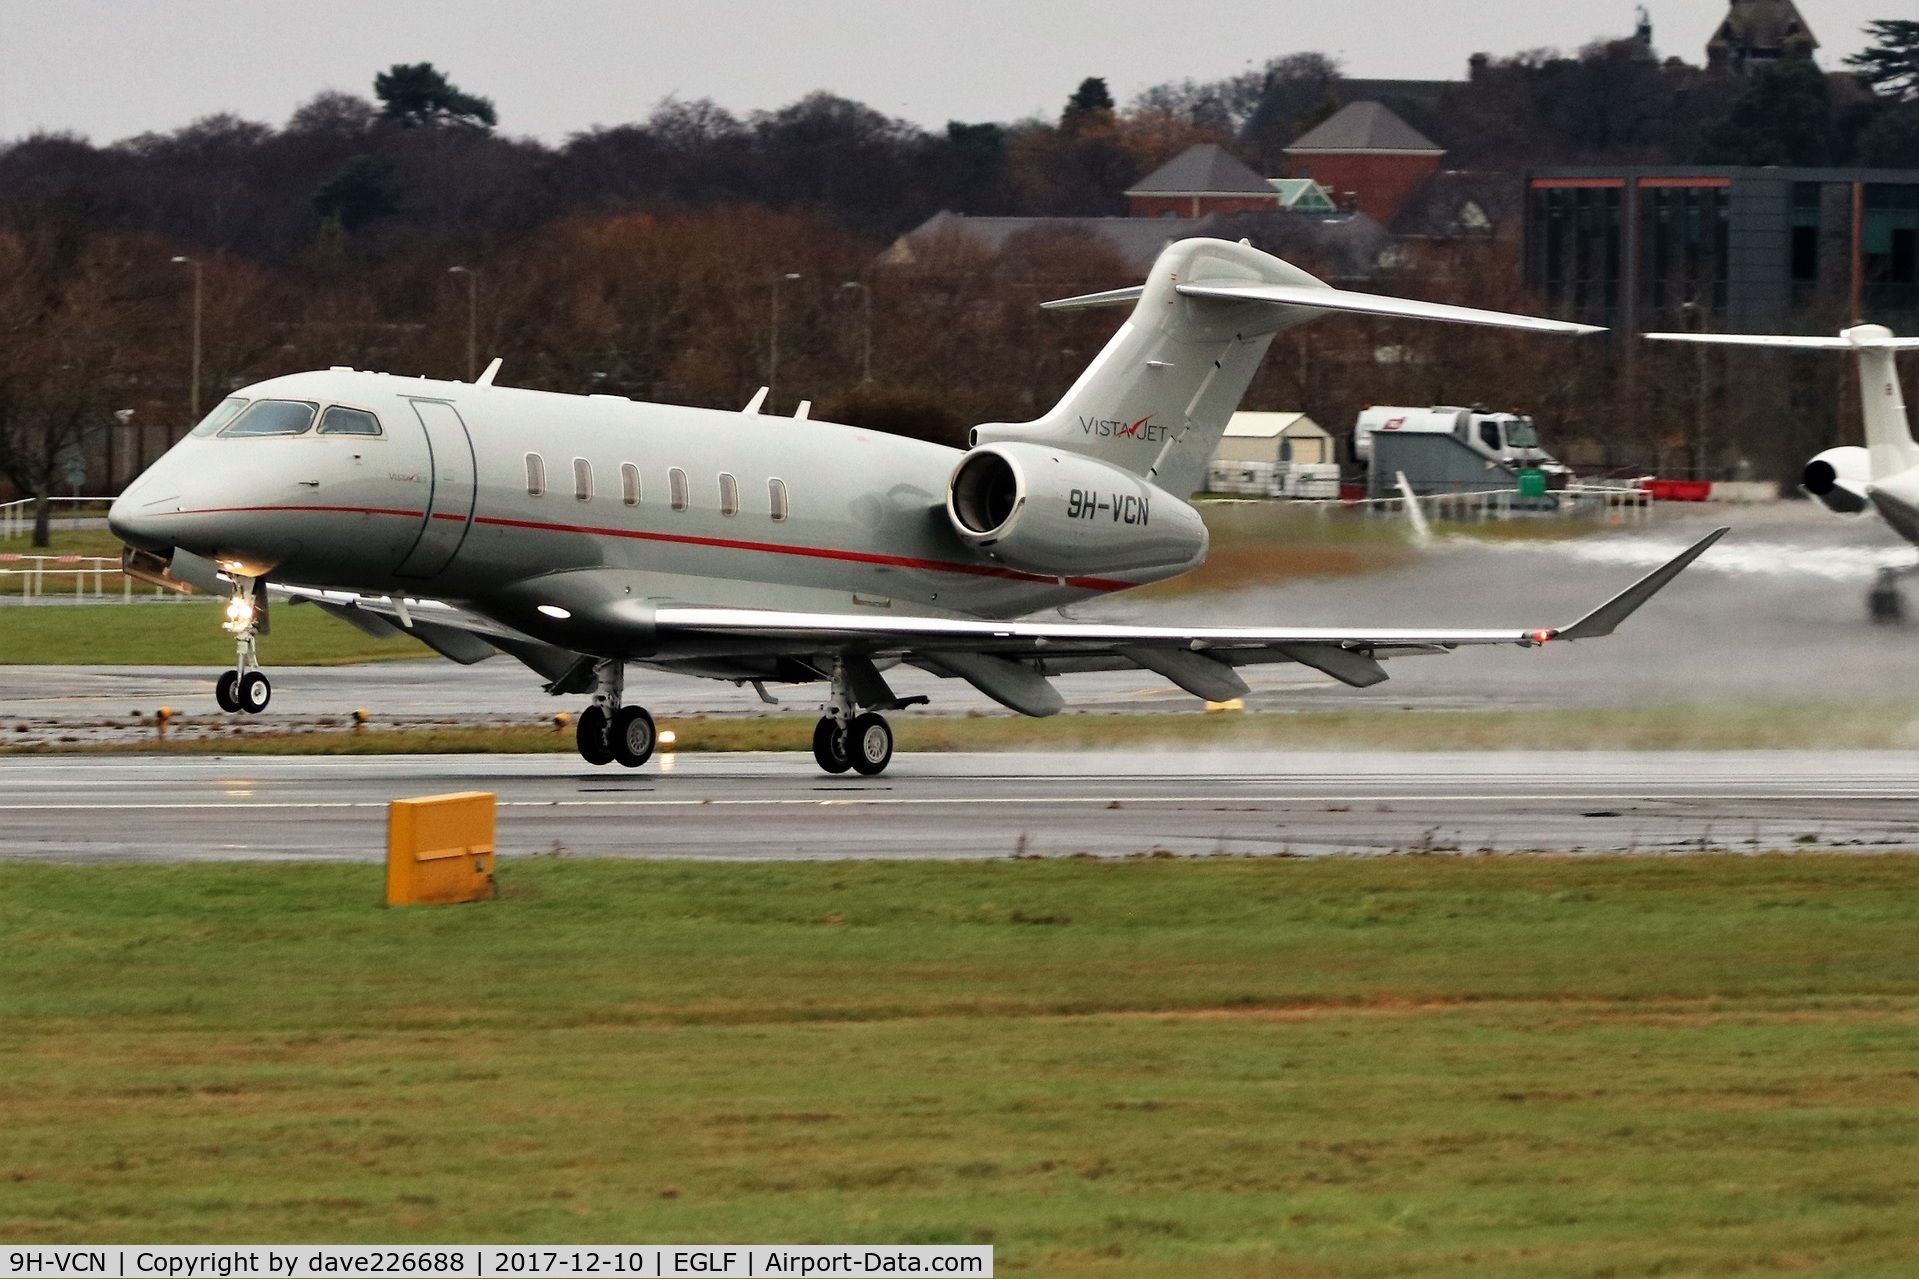 9H-VCN, 2016 Bombardier Challenger 350 (BD-100-1A10) C/N 20628, 9H VCN of Vistajet taking off from Farnborough on 24